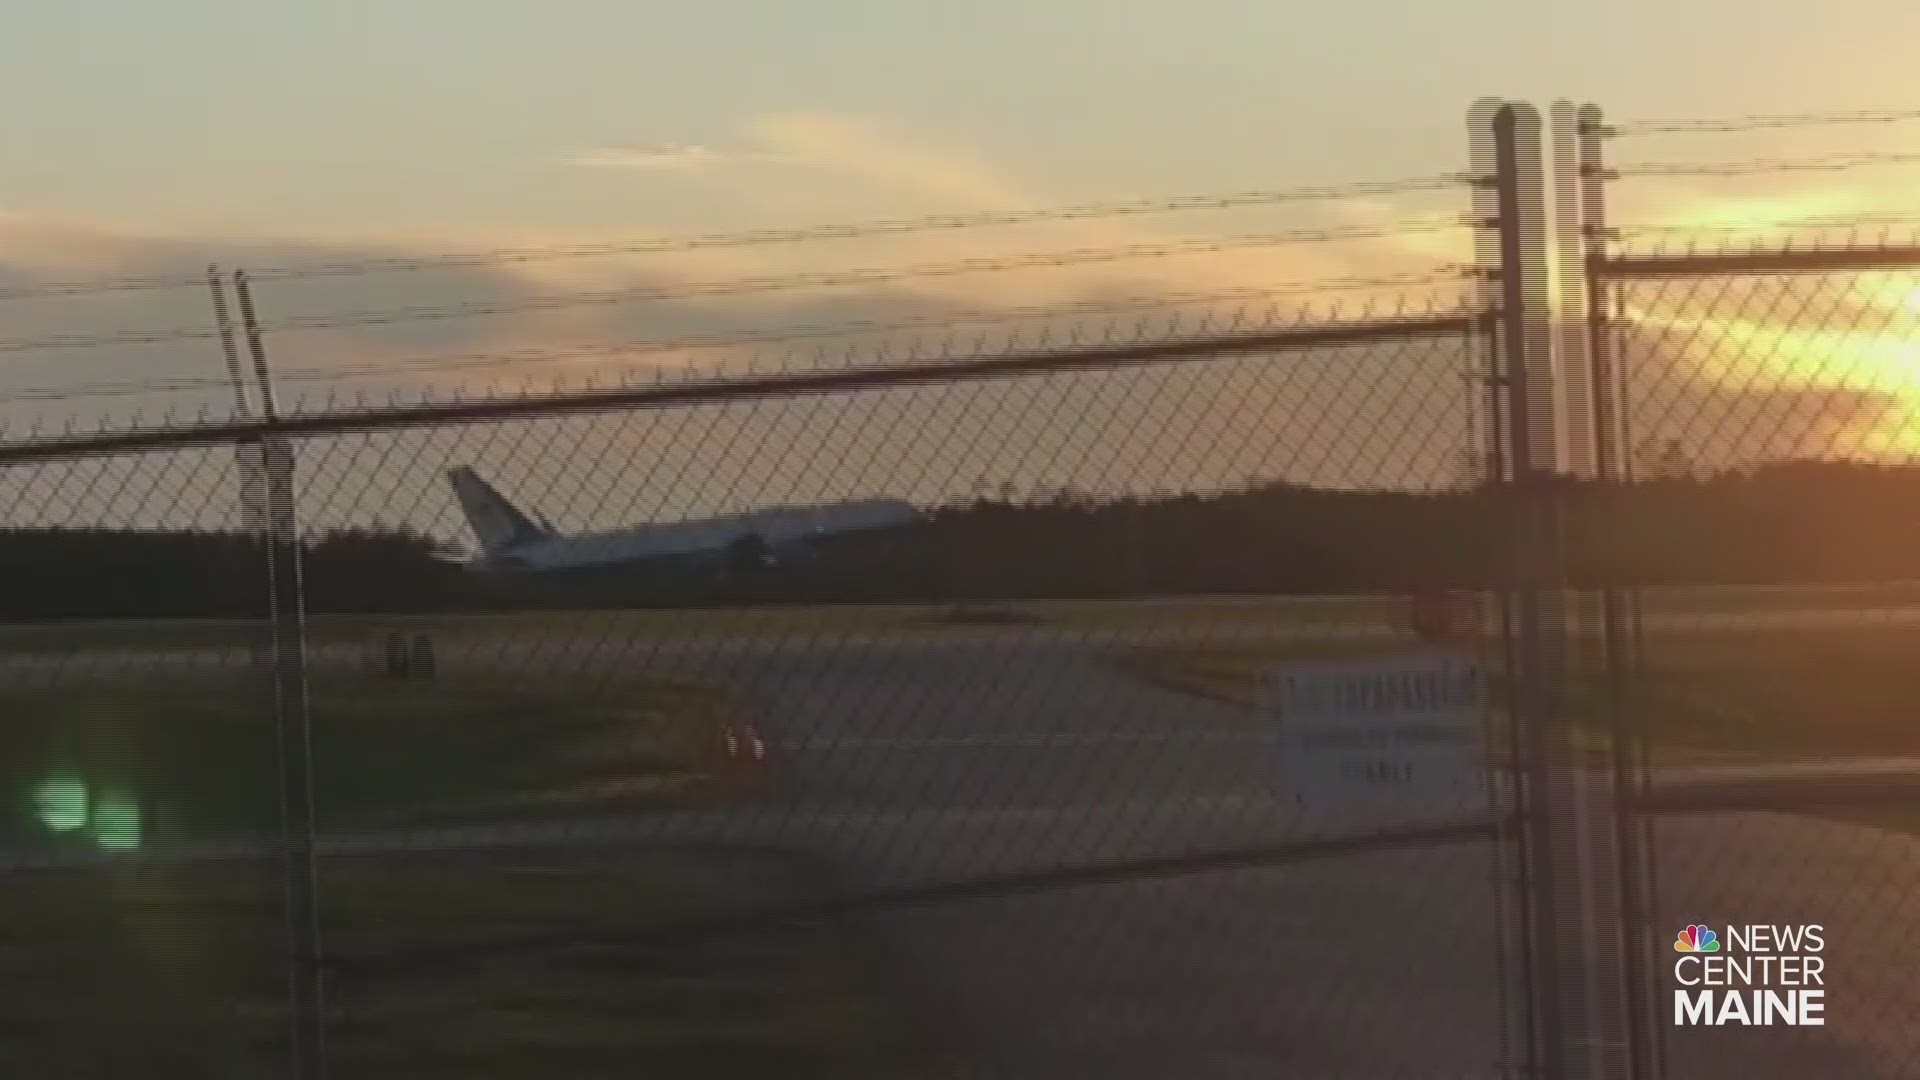 Vice President's plane and crew may have trained in Bangor